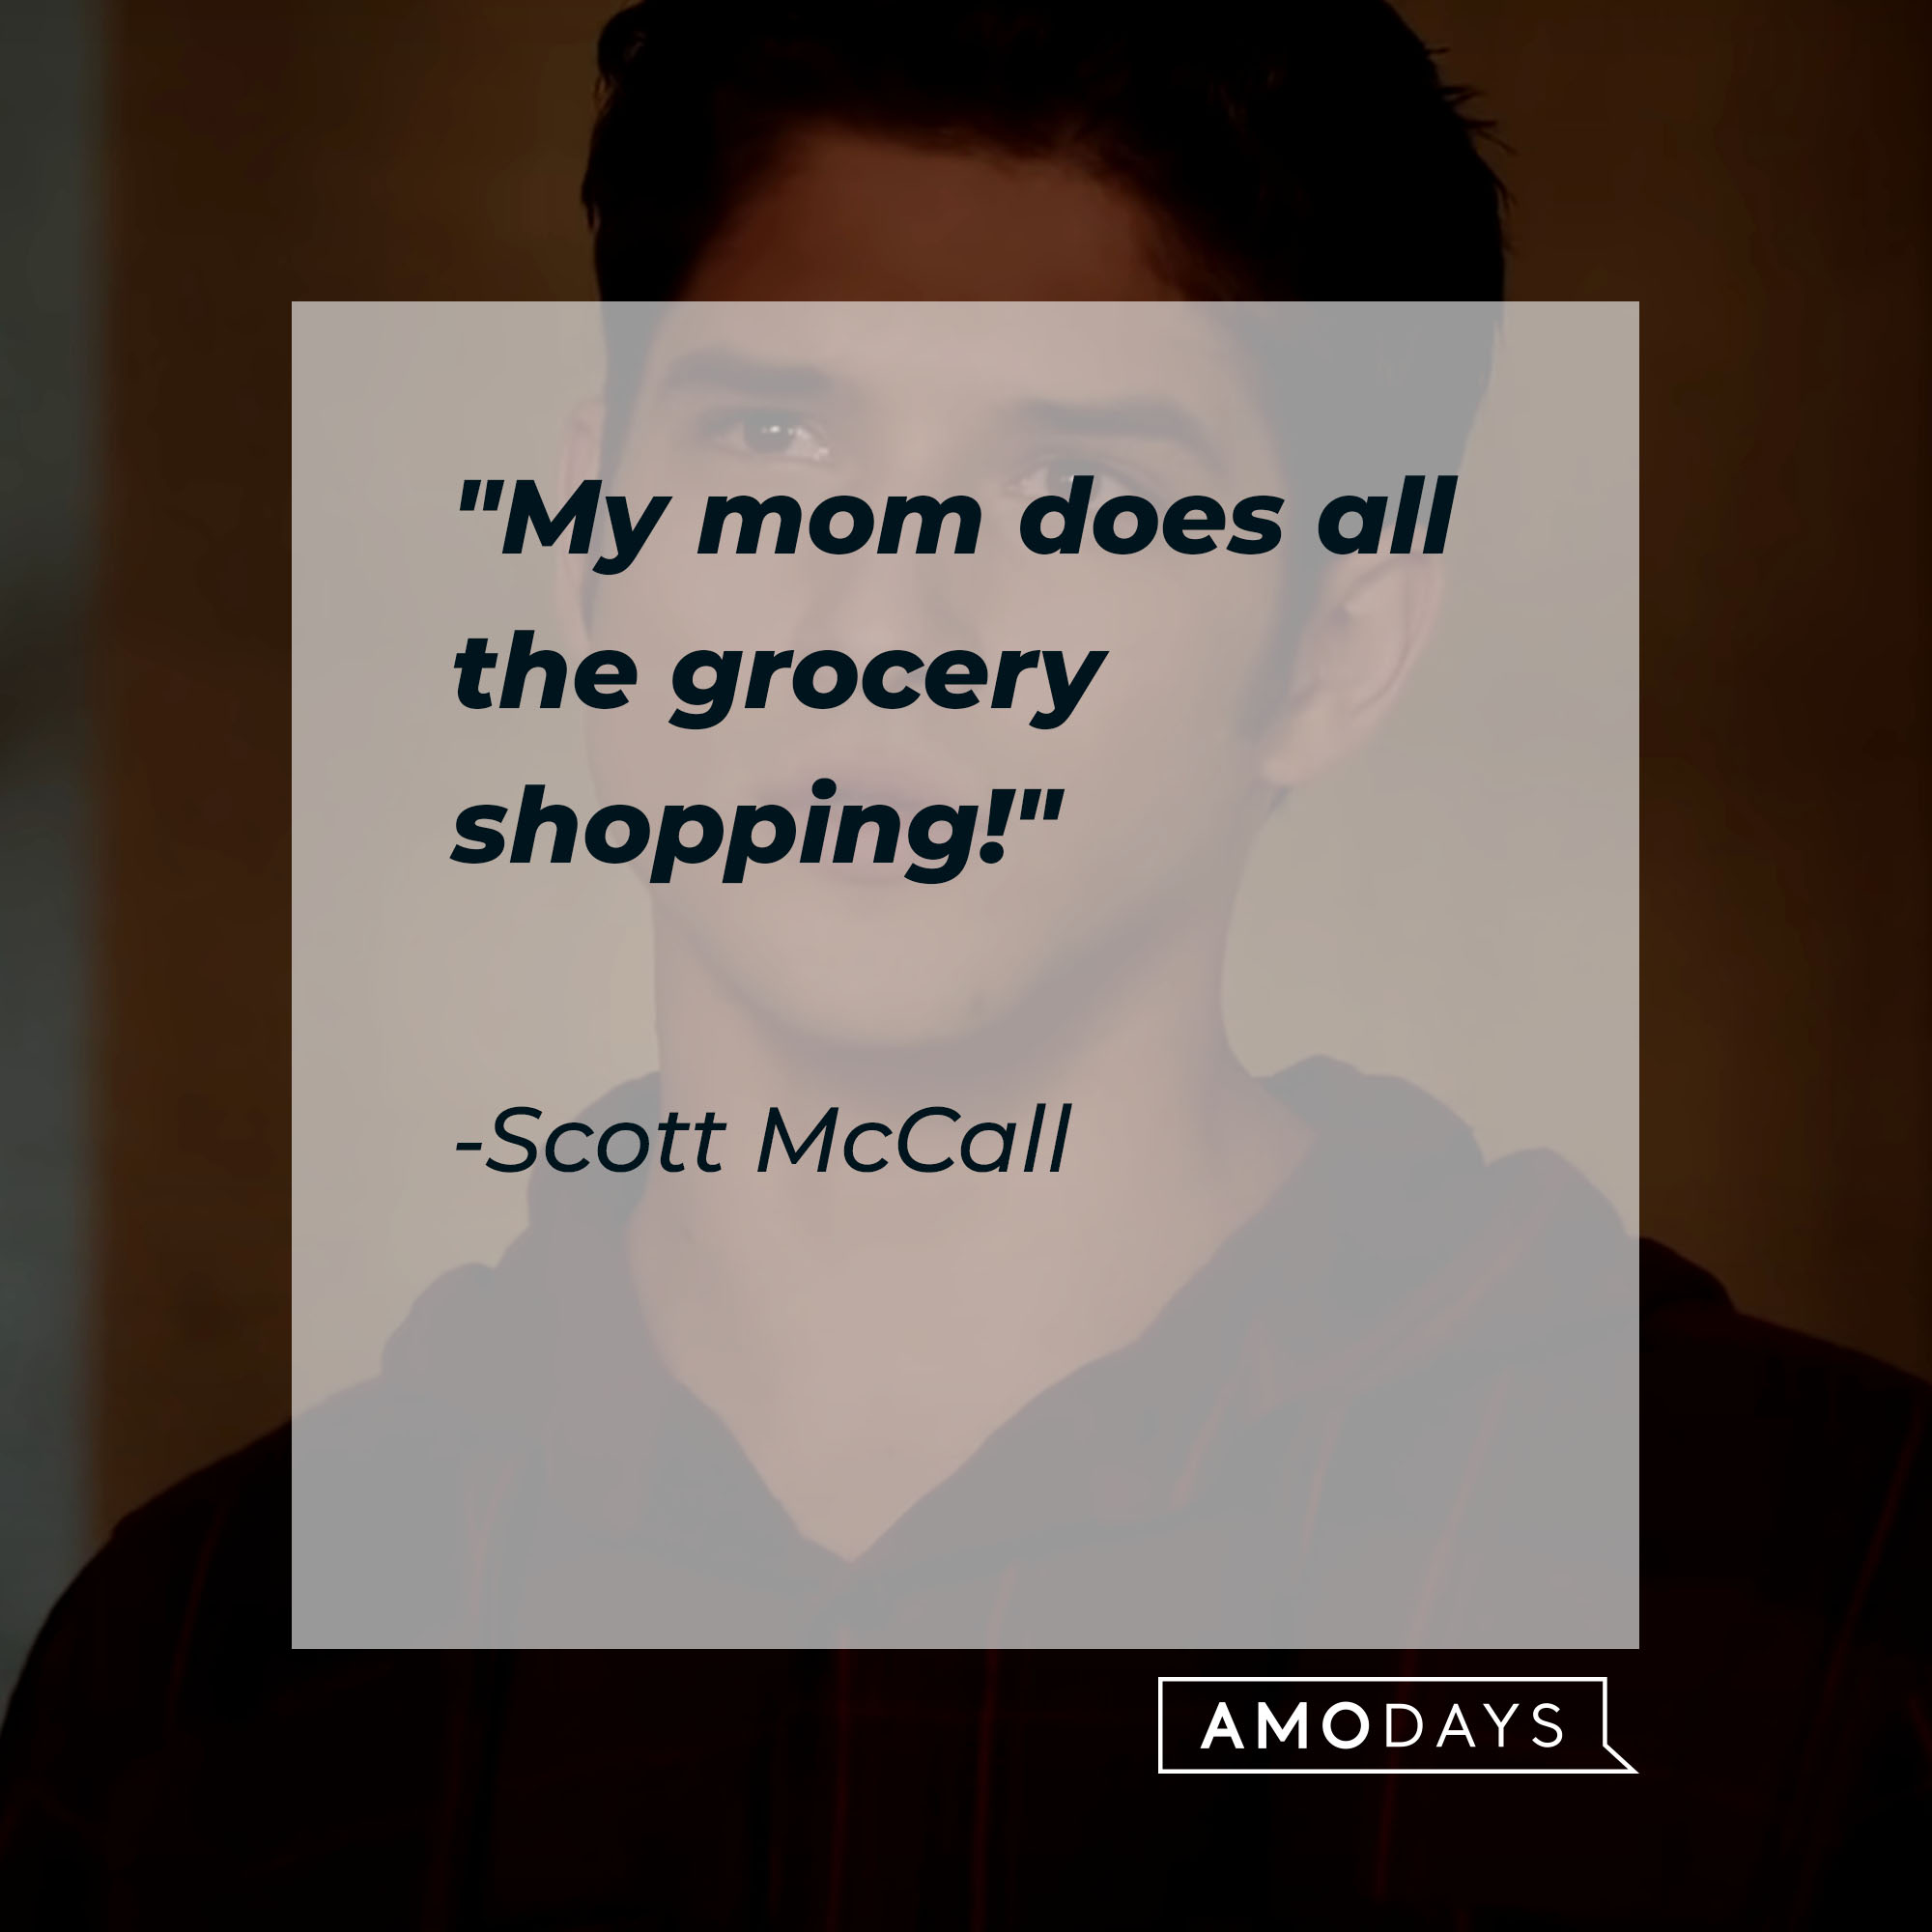 Scott McCall's quote: "My mom does all the grocery shopping!" | Source: Youtube.com/WolfWatch